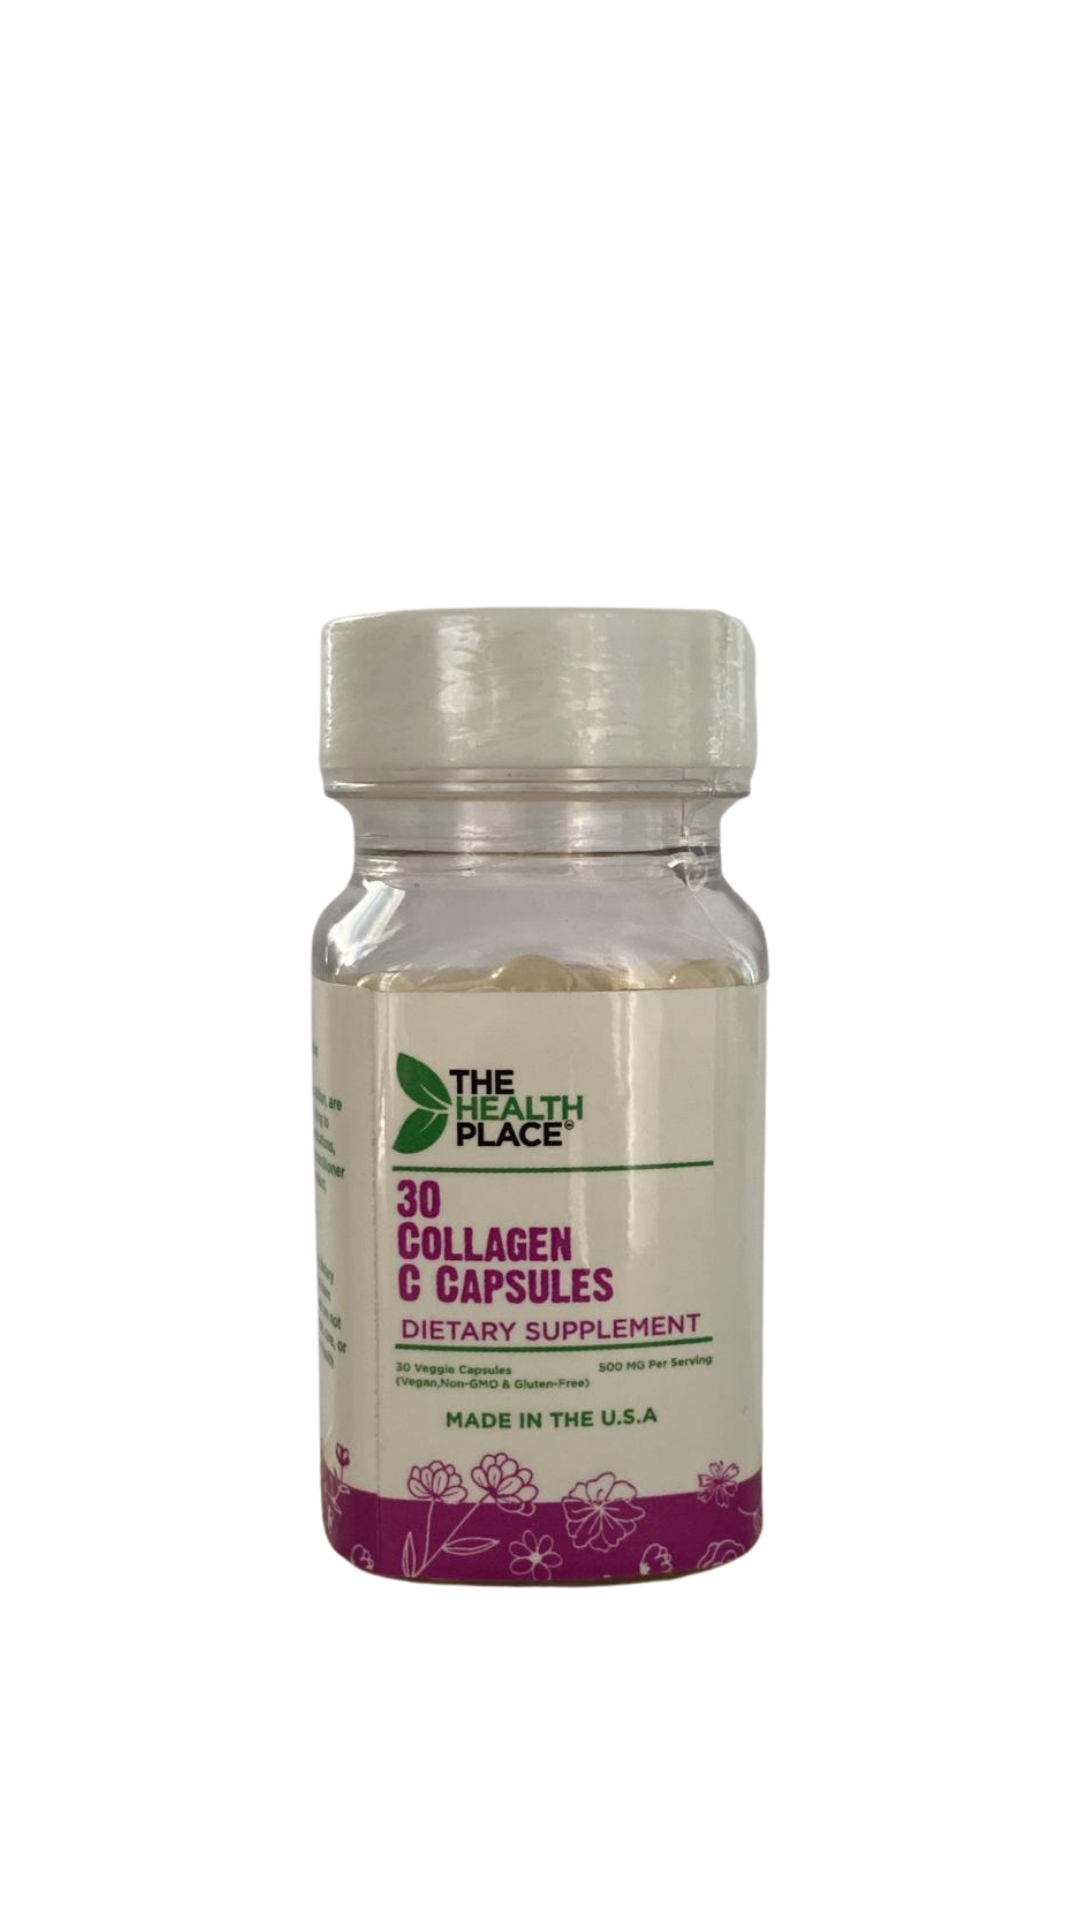 Collagen C - 30 Capsules 650mg each *REFILL PLEASE READ